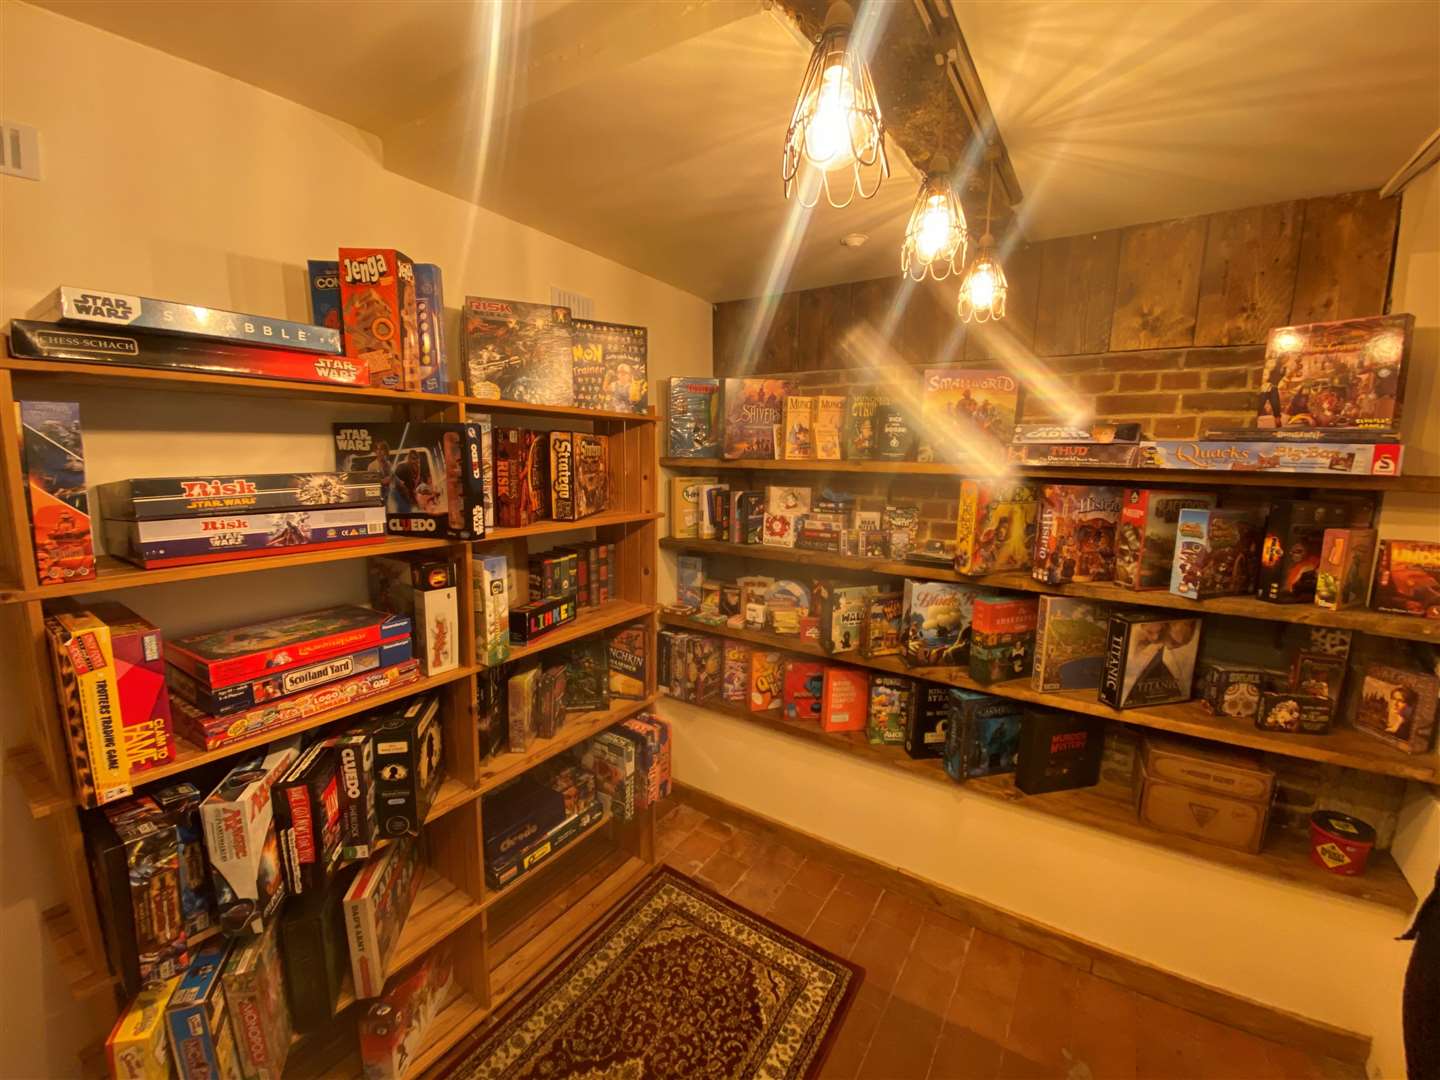 The Long Rest in Canterbury has more than 150 board games